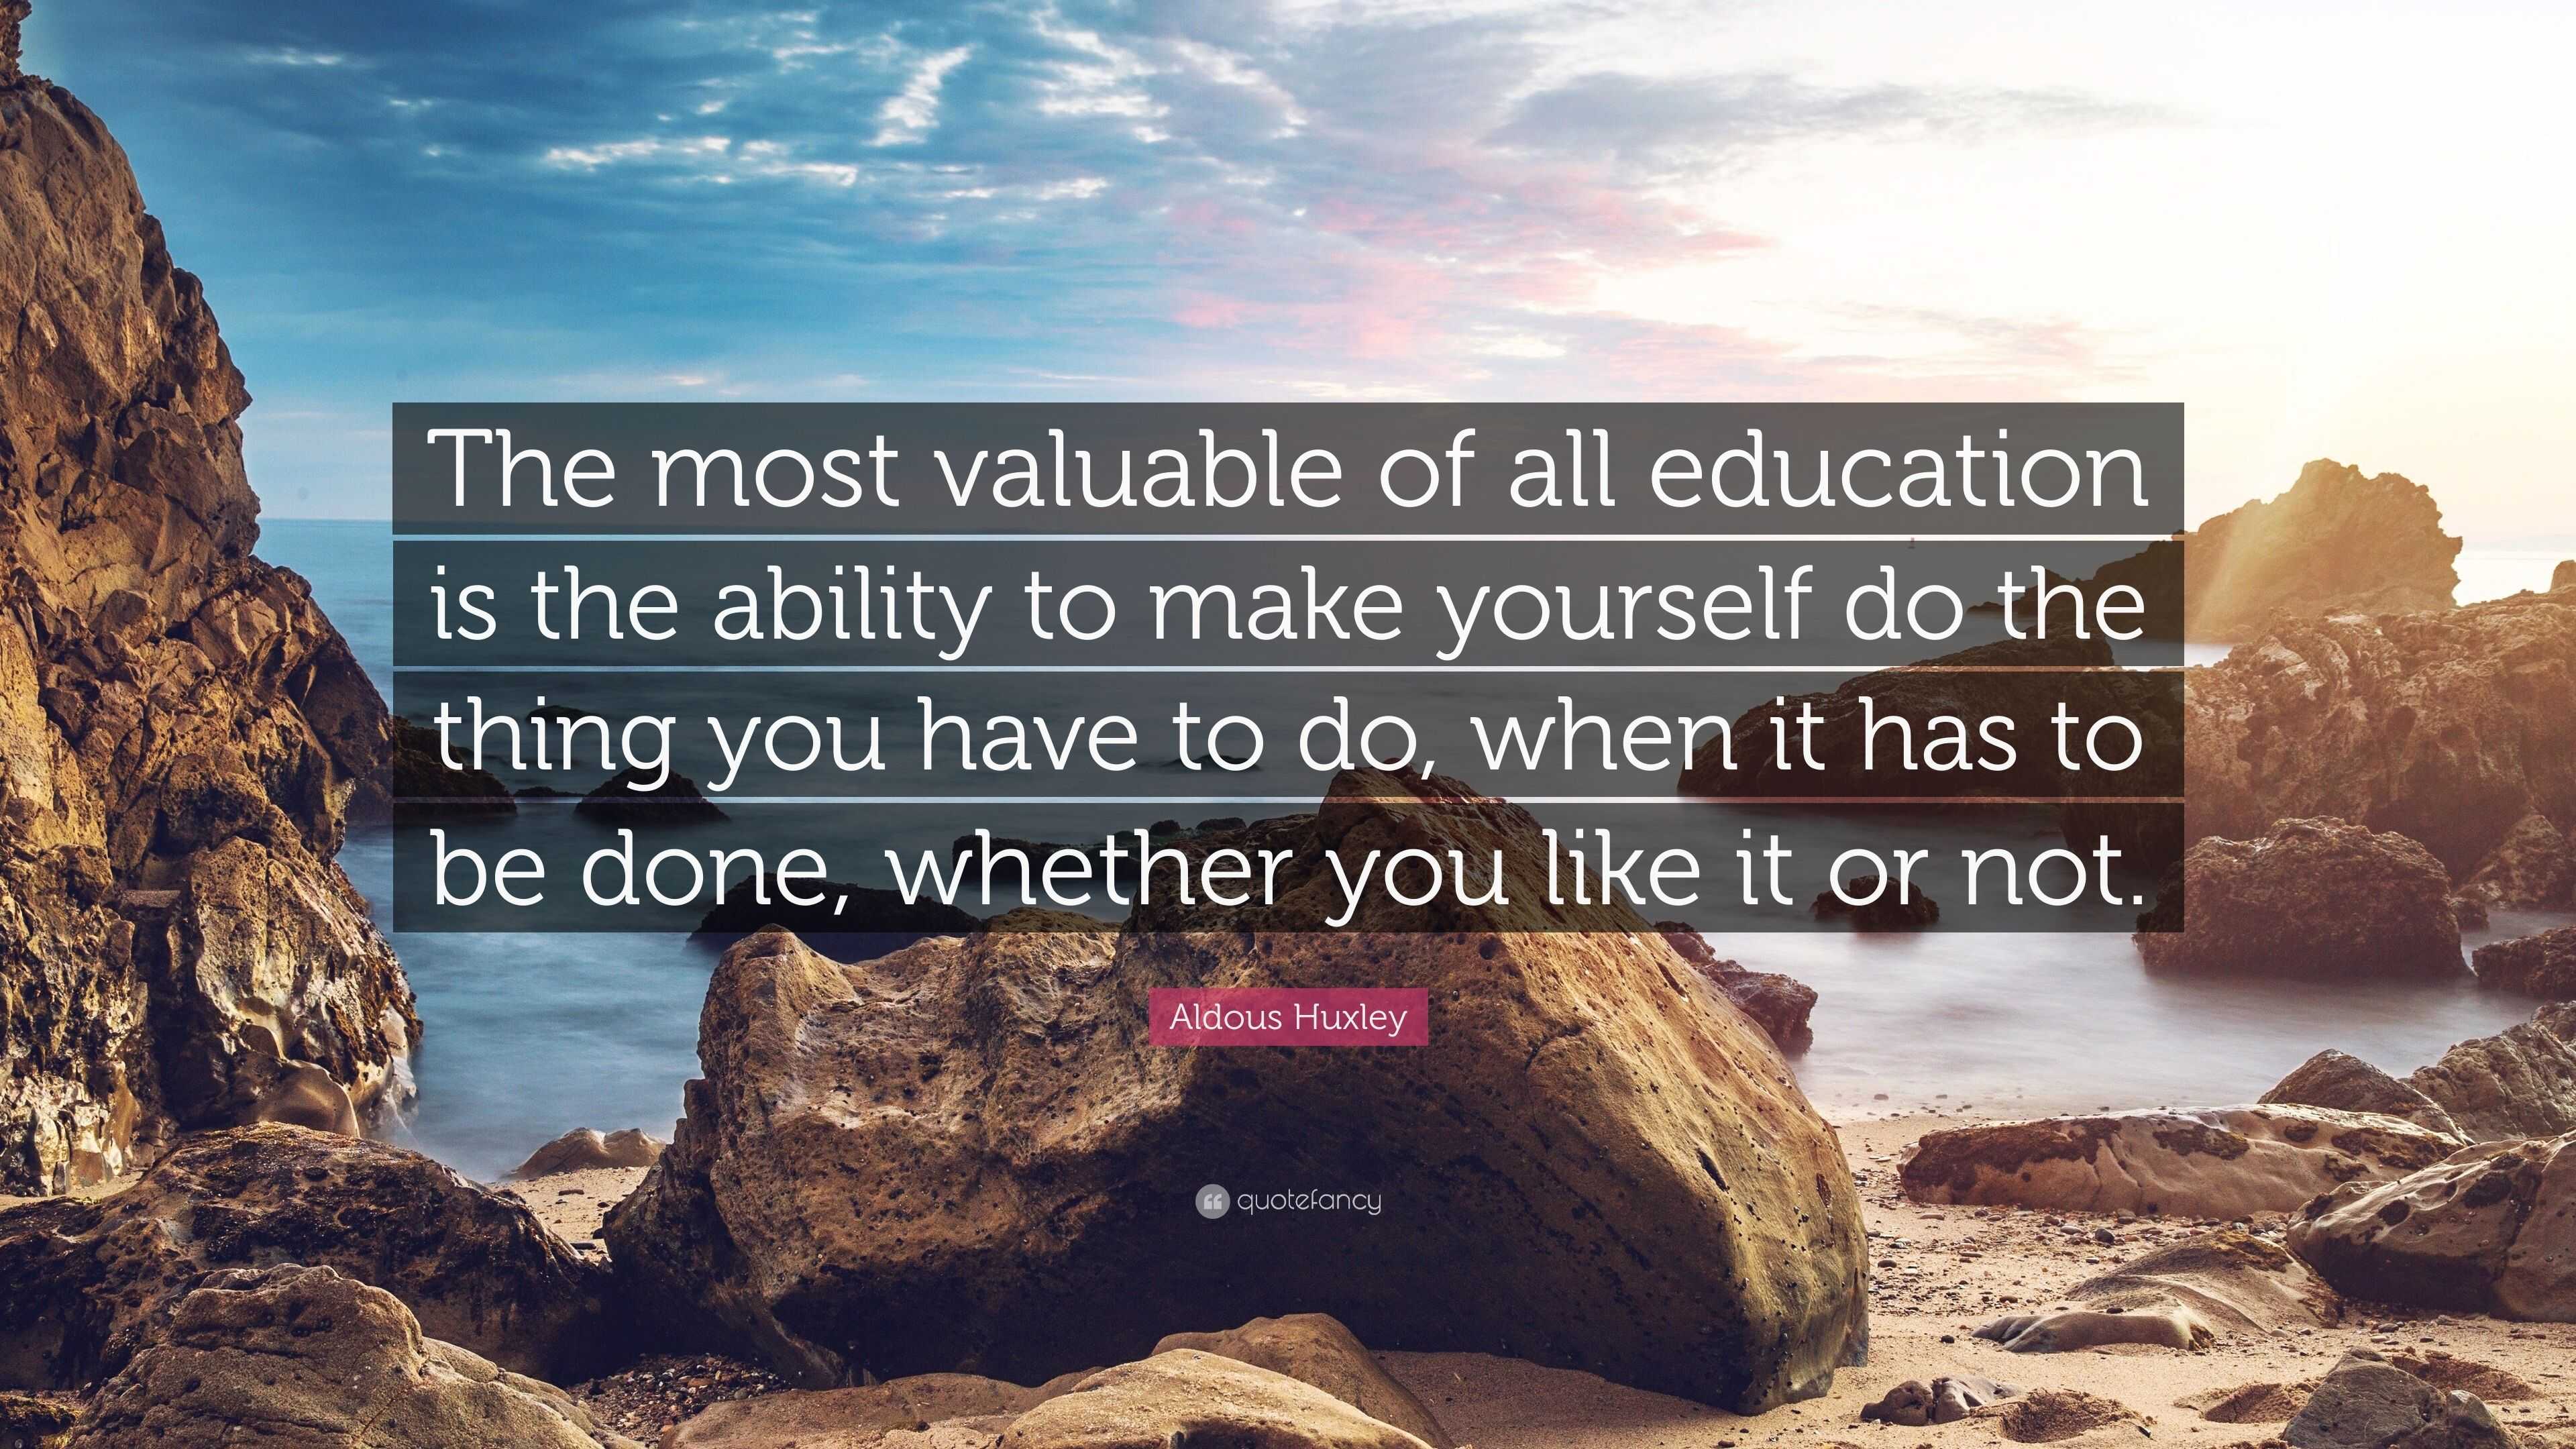 Aldous Huxley Quote: “The most valuable of all education is the ability ...